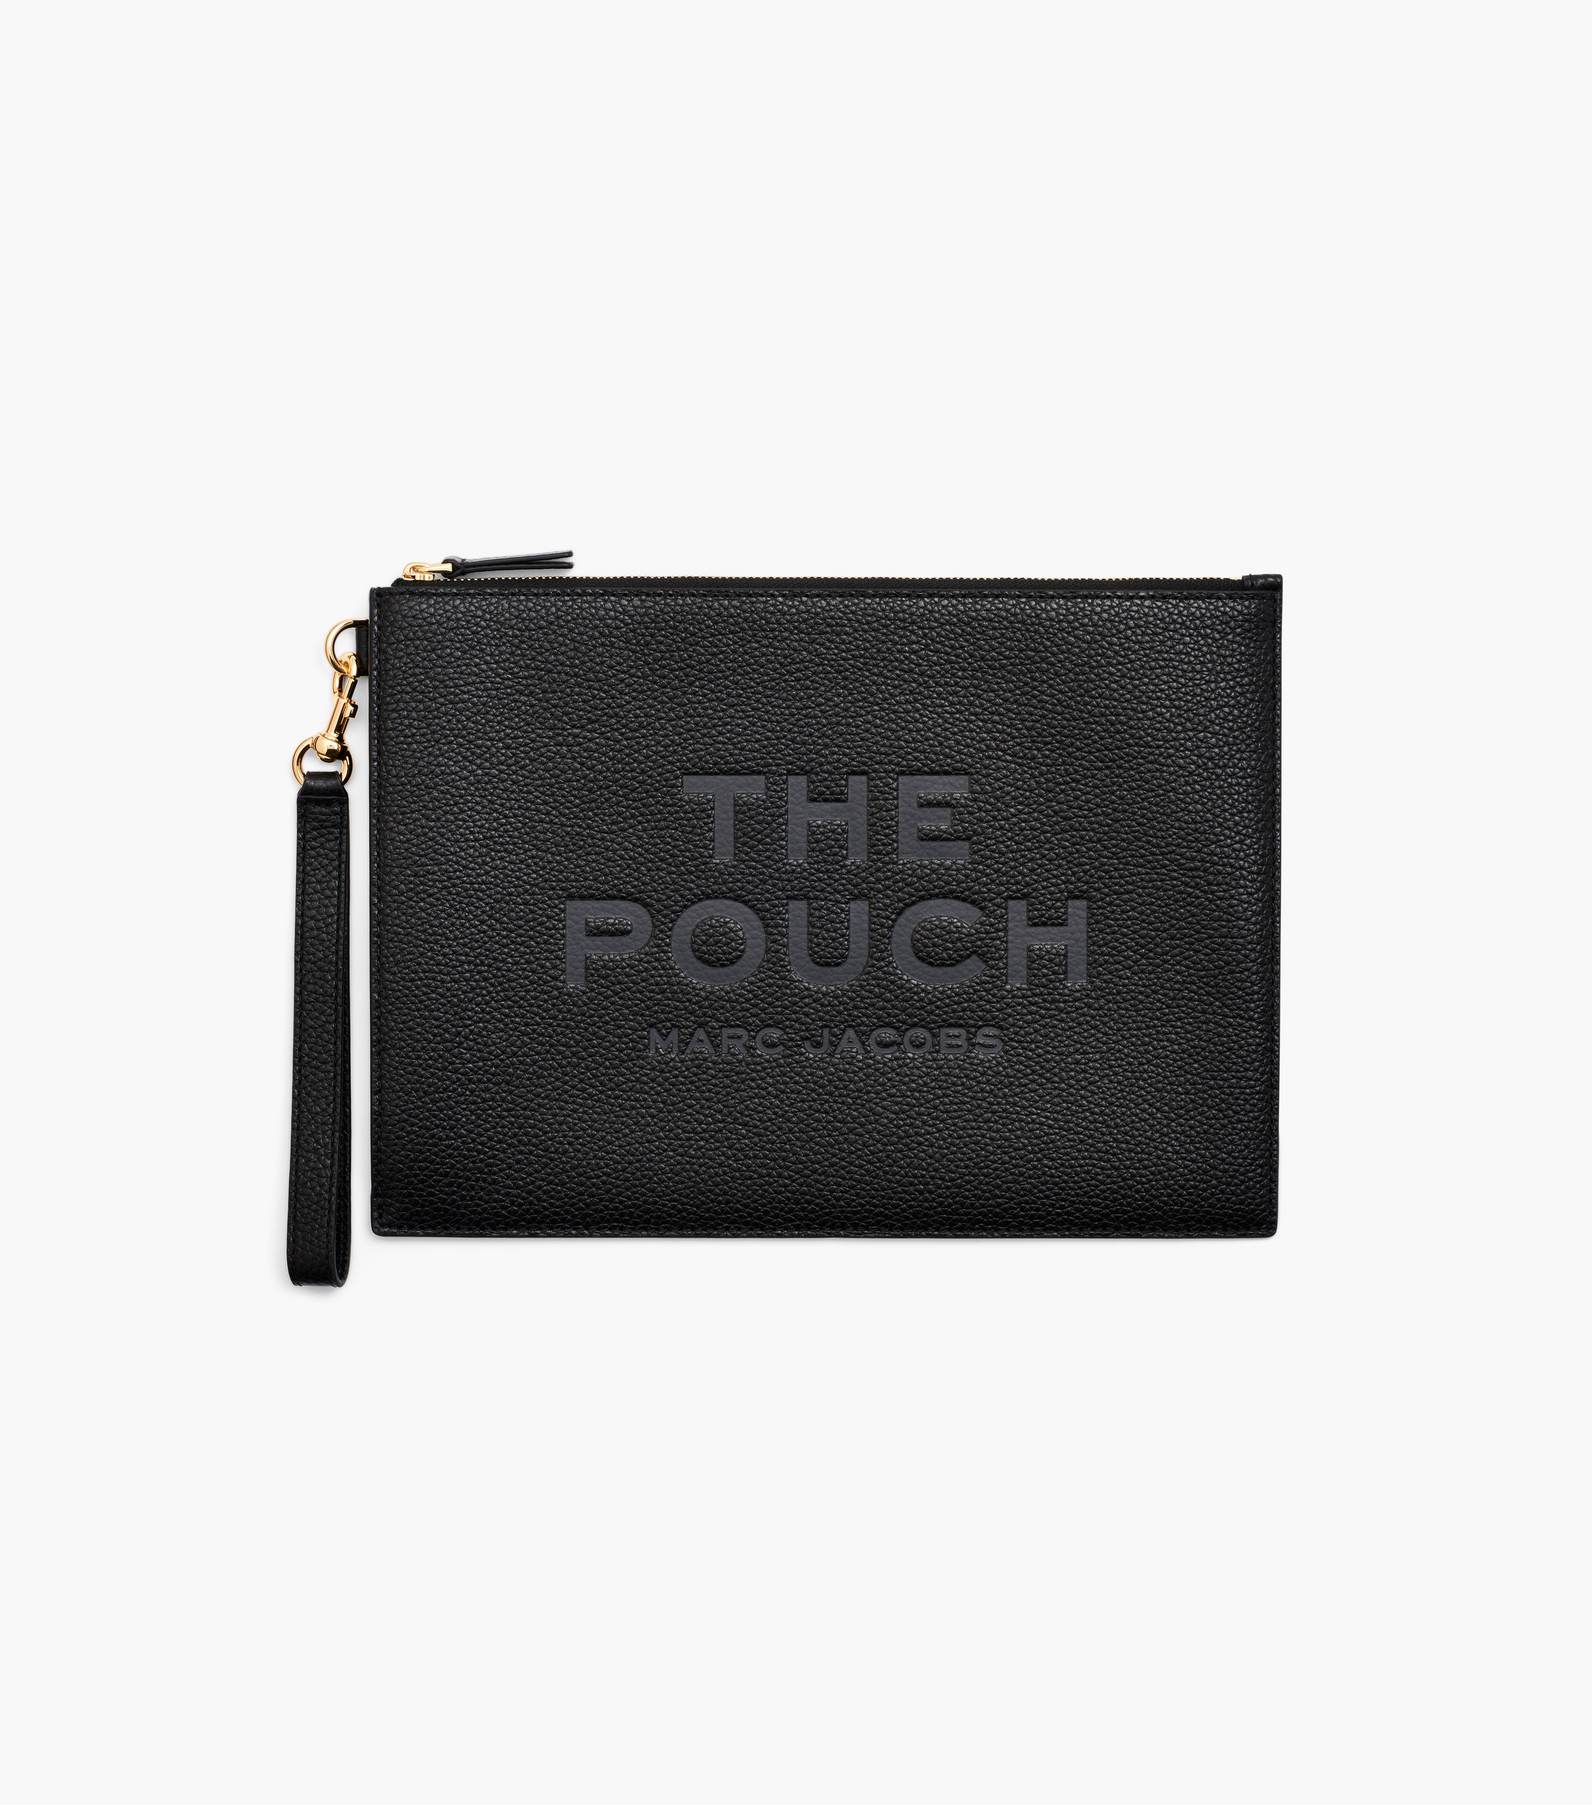 The Leather Large Pouch